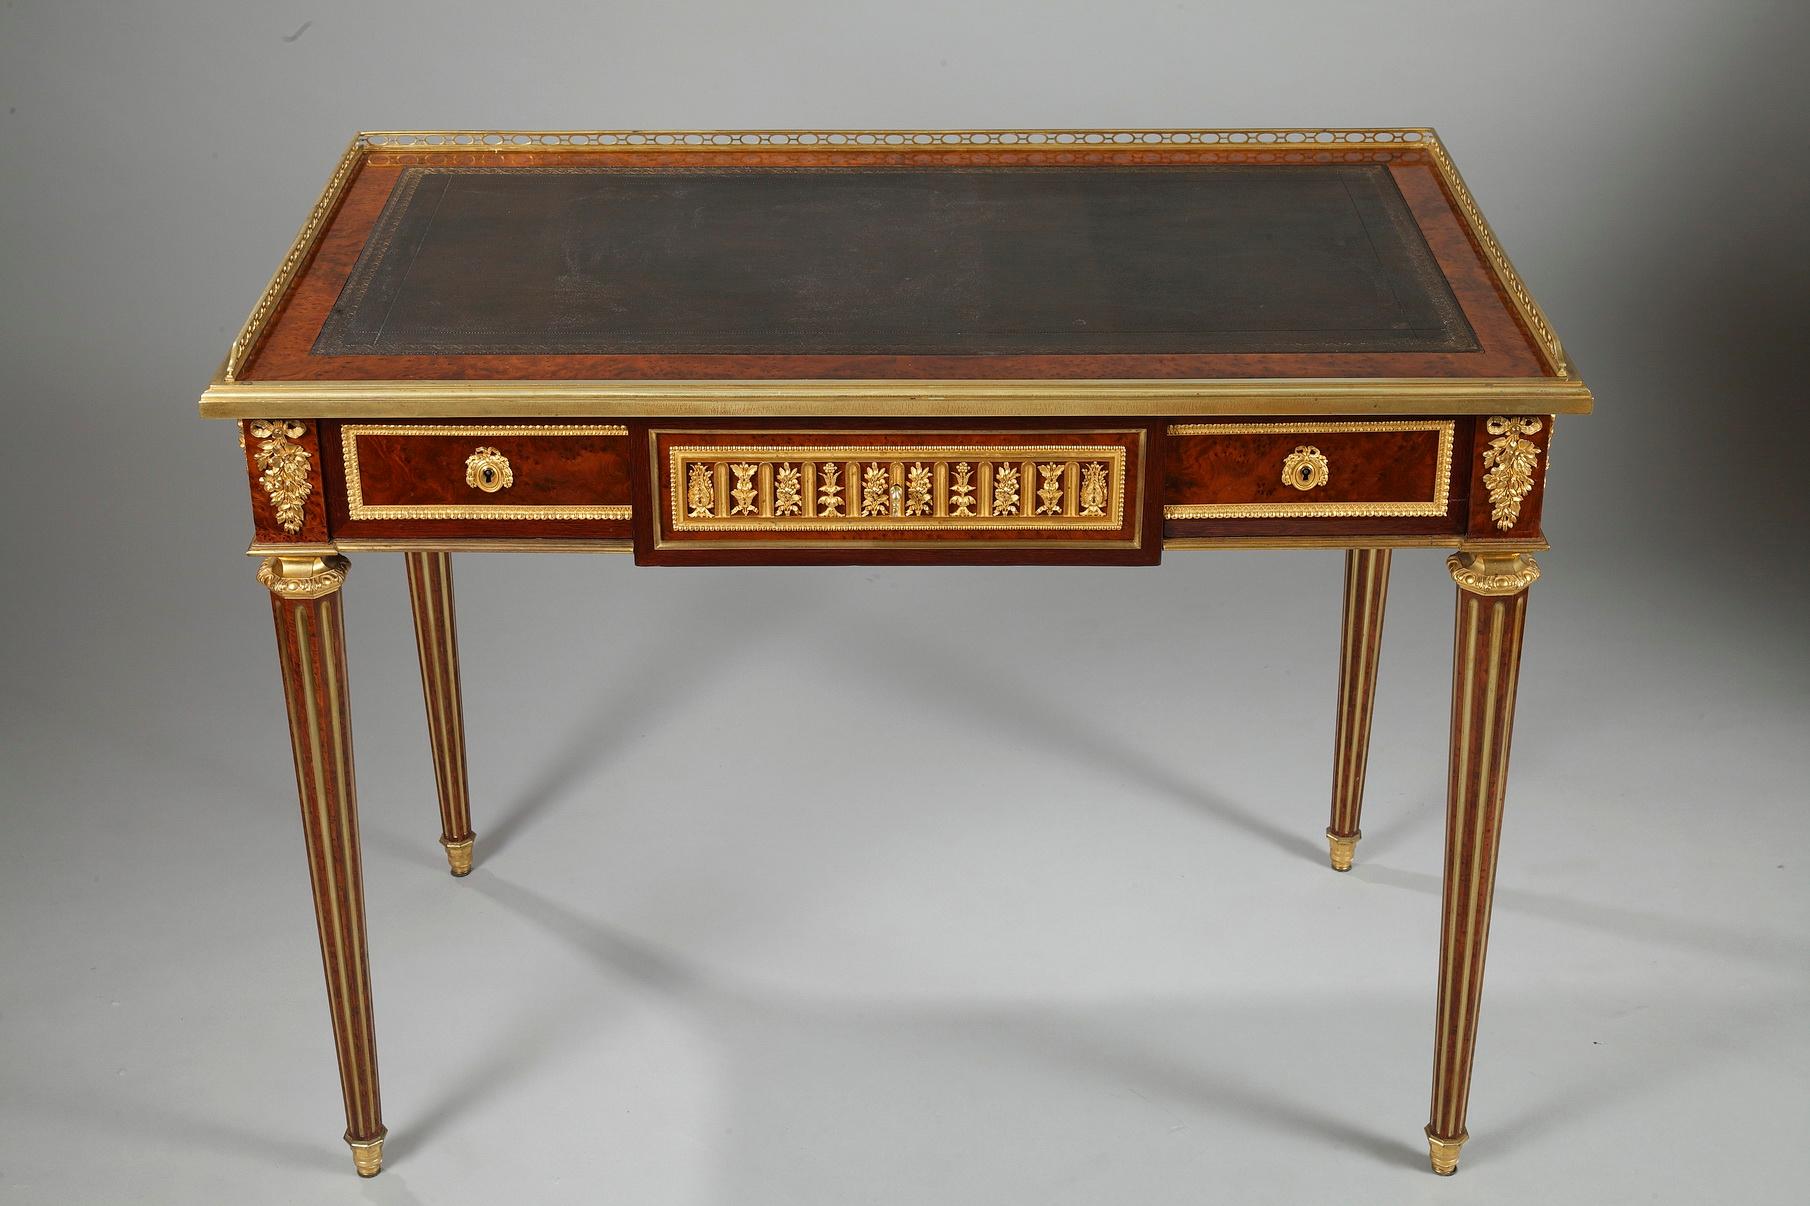 French Exquisite Louis XVI Style Flat Desk by C.G Winckelsen, France, 1862